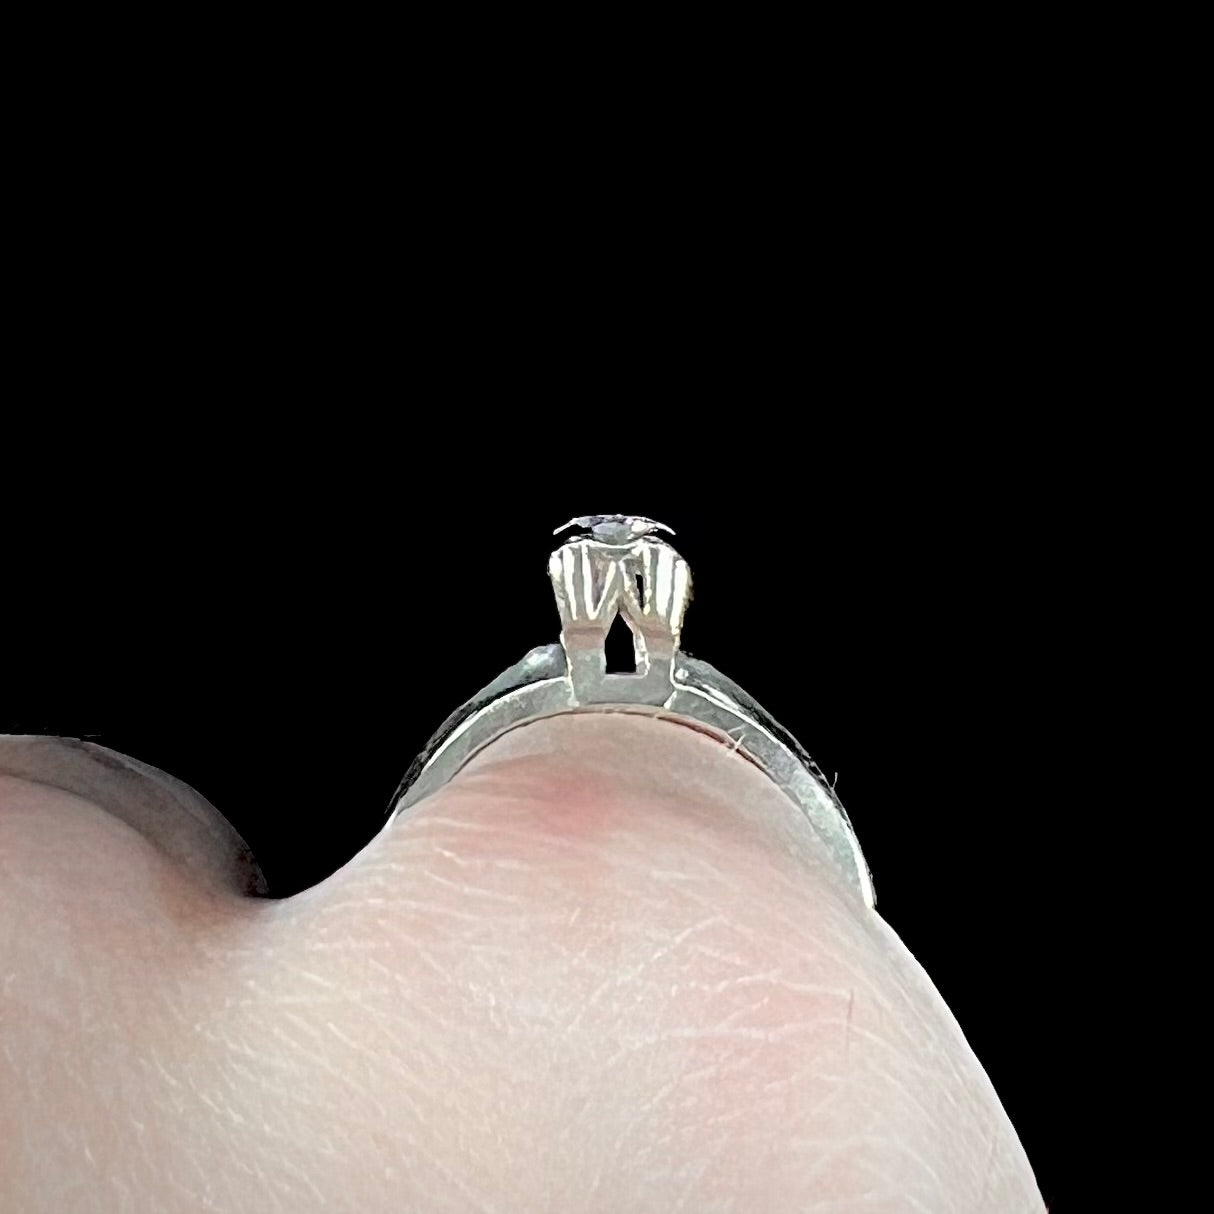 A ladies' vintage 14kt white gold 1940's diamond solitaire ring.  The diamond is chipped in two places.